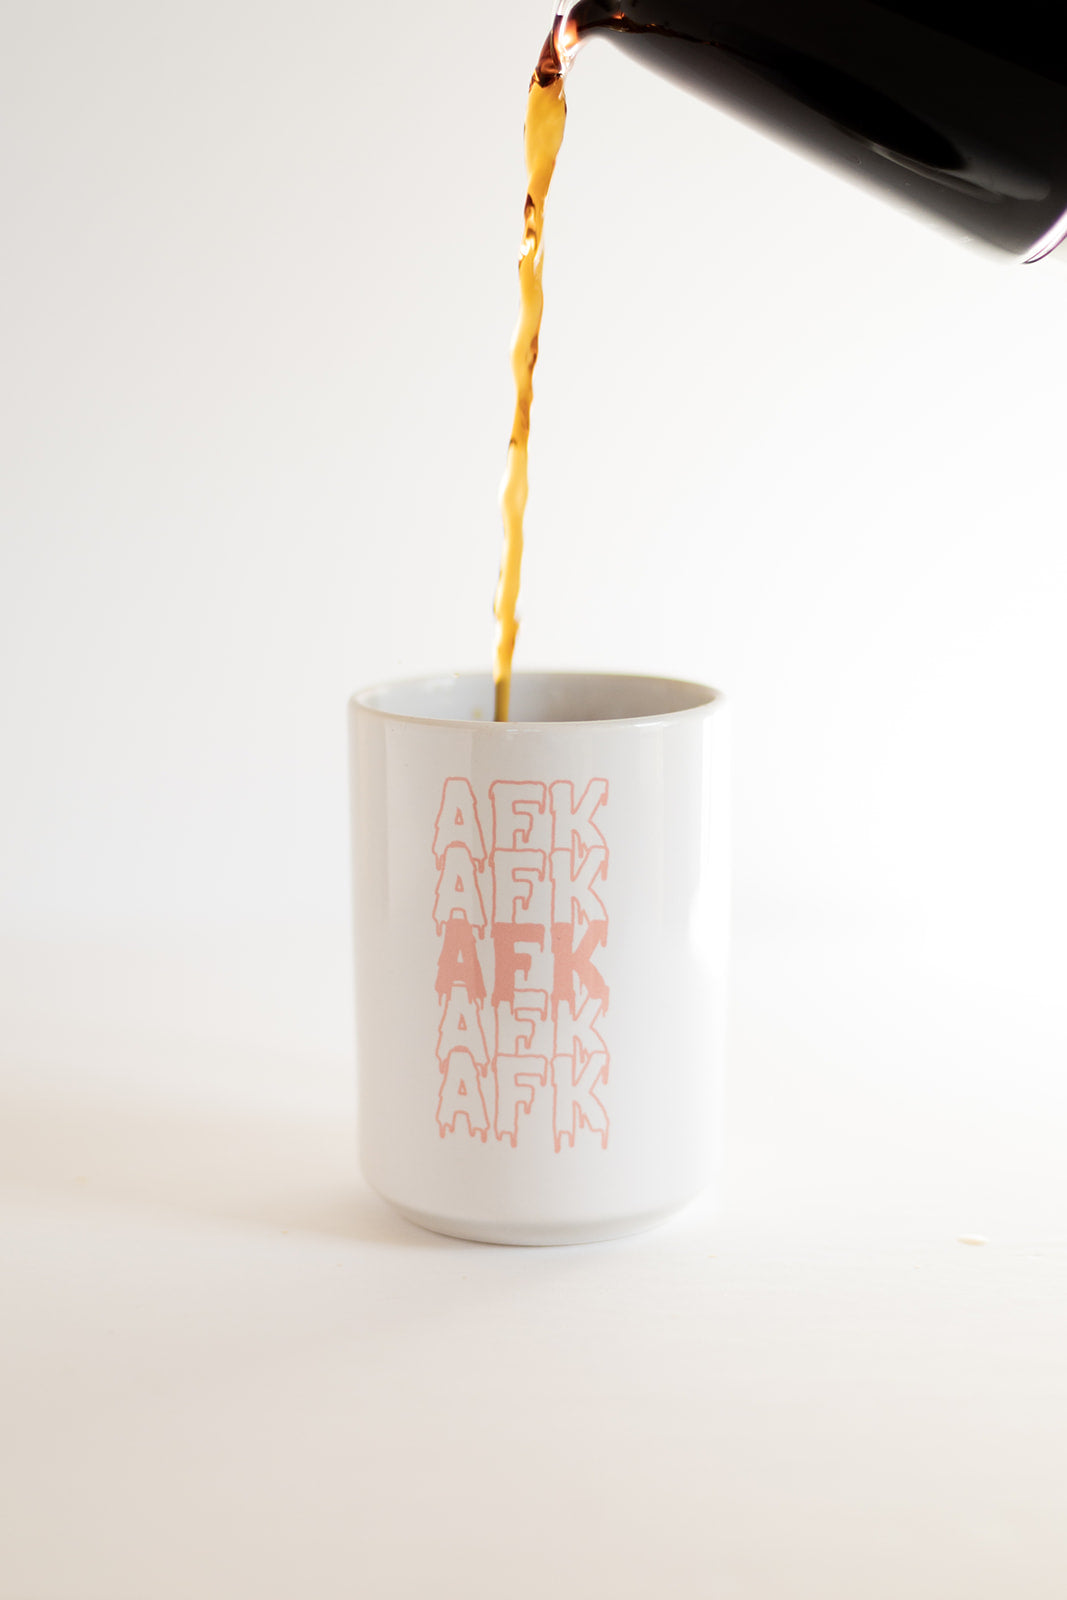 Drippy AFK | Fall Mug Deluxe 15oz. Mugs Threads & Thistles Inventory 